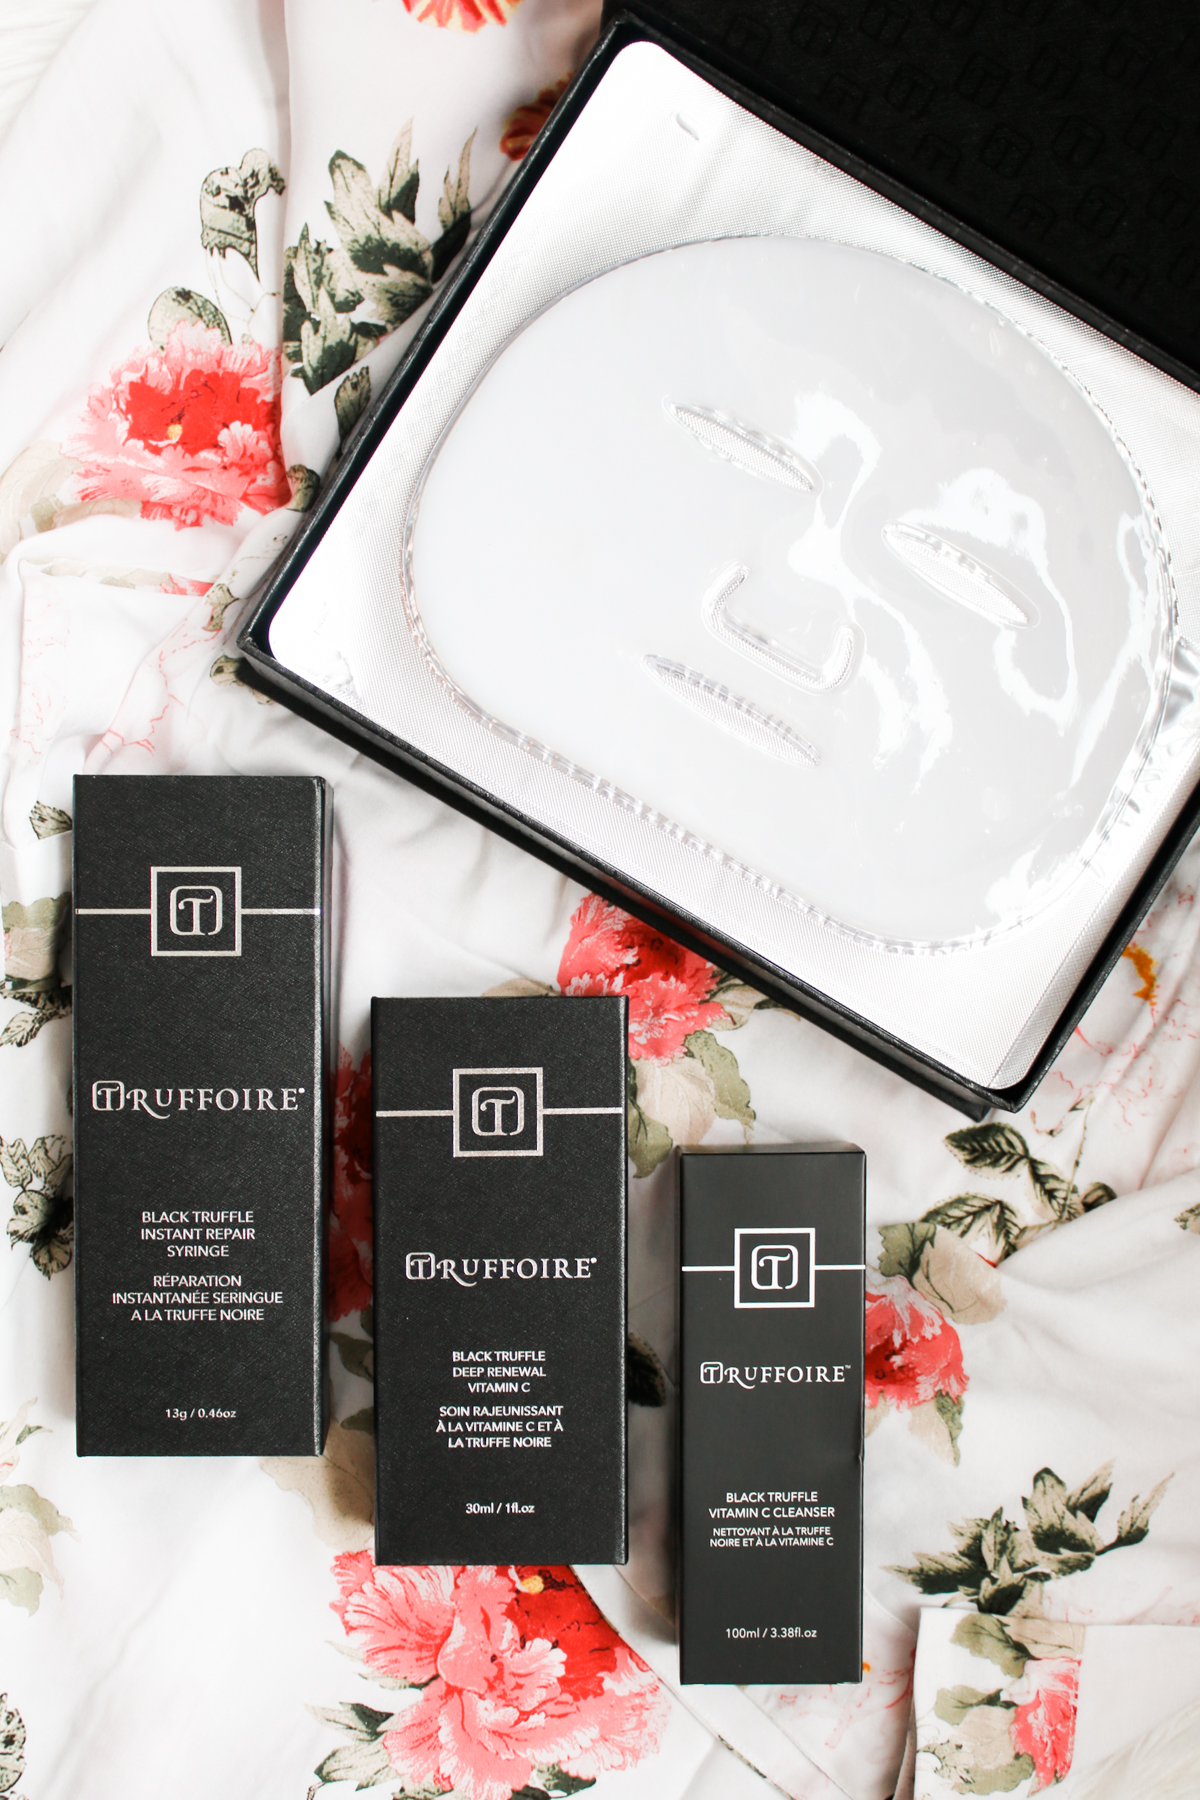 Truffoire skin care review, black truffle skincare, truffle skincare, Truffoire Review: The Benefits of Black Truffle Skincare by beauty blogger Stephanie Ziajka from Diary of a Debutante, Truffoire Black Collection review, Truffoire review